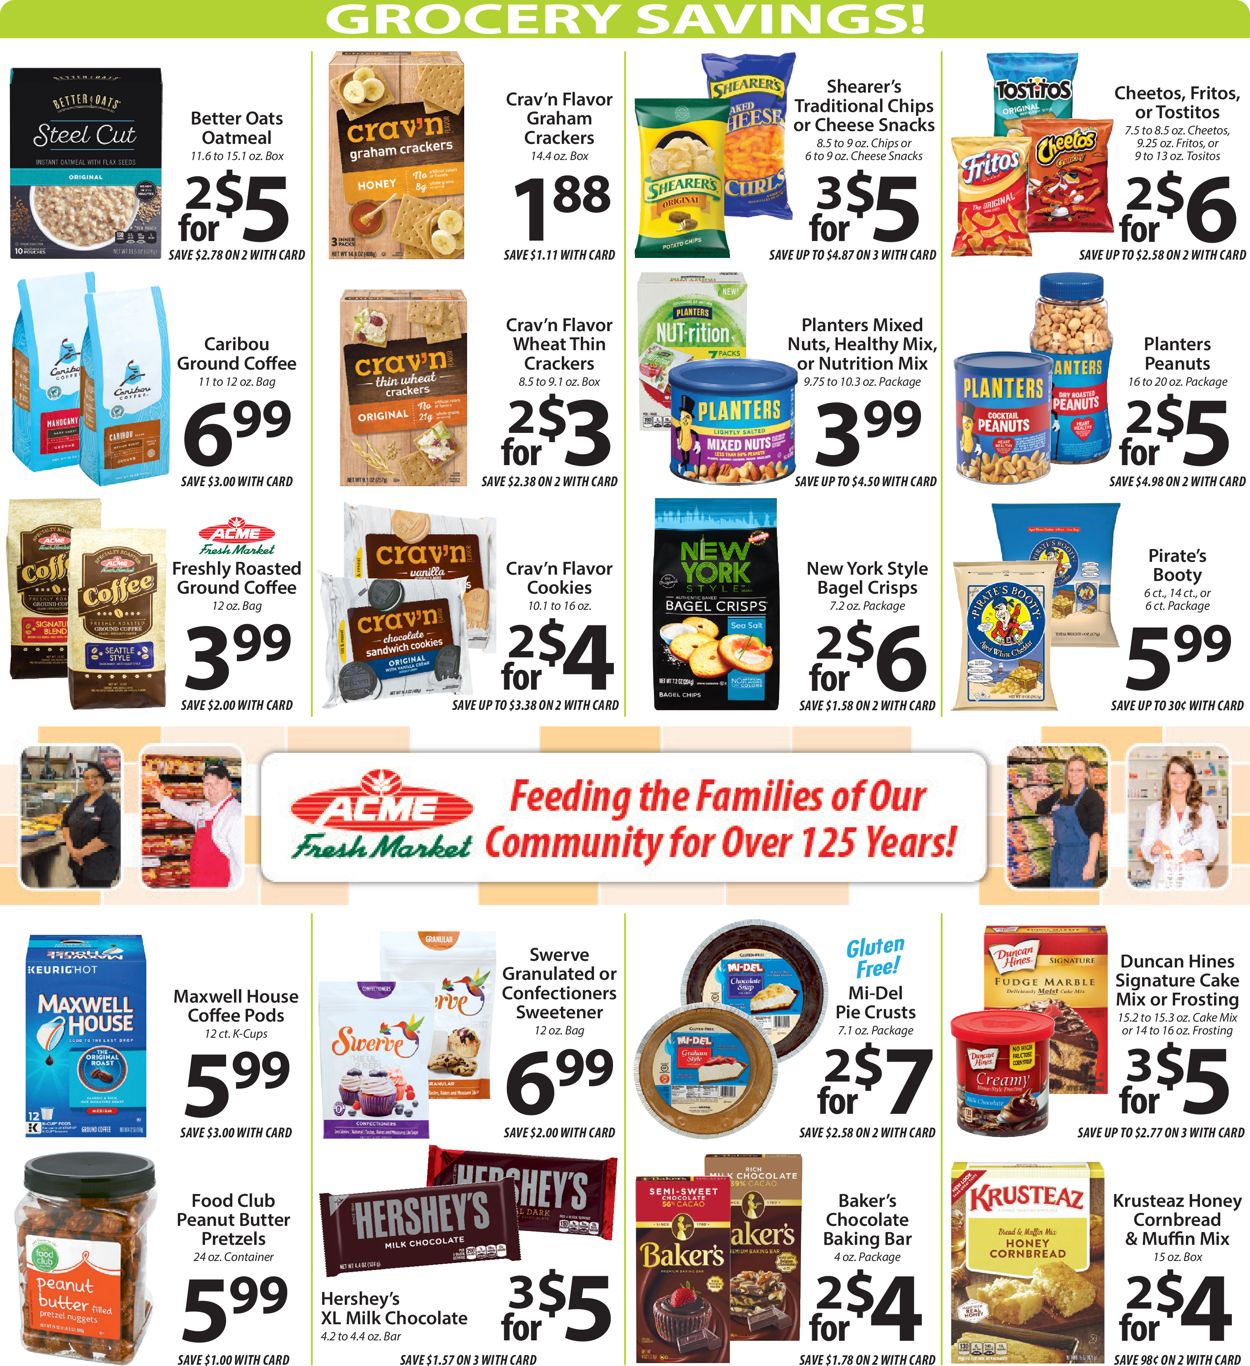 Catalogue Acme Fresh Market Thanksgiving 2020 from 11/19/2020